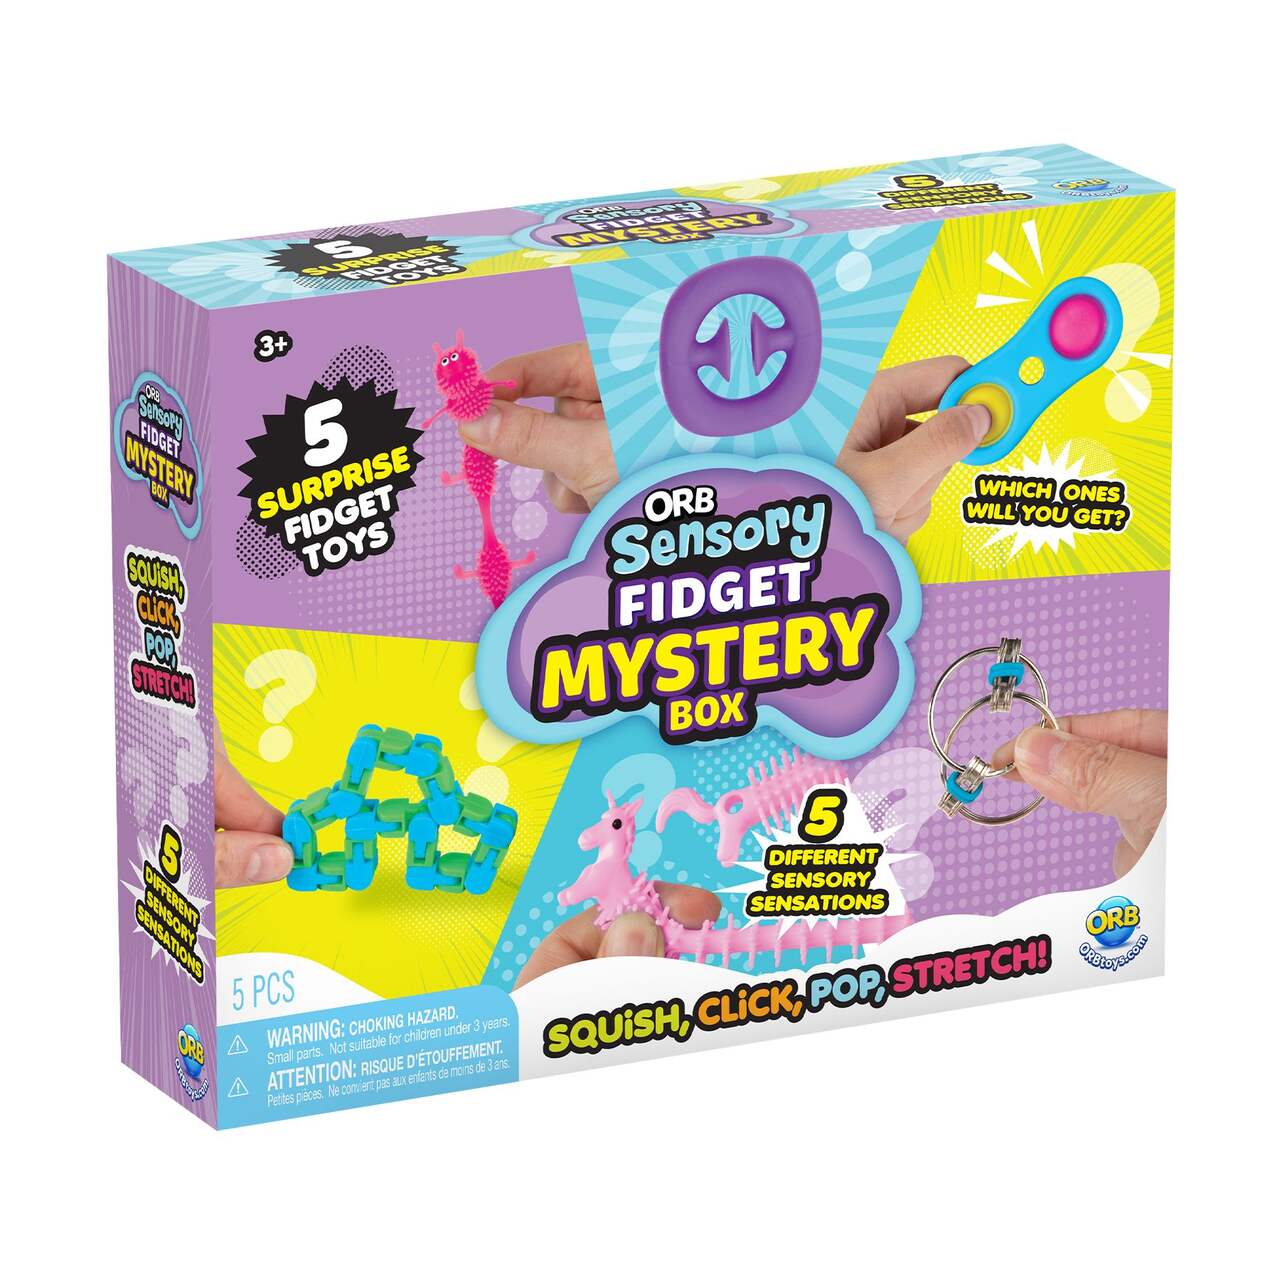 https://media-www.canadiantire.ca/product/seasonal-gardening/party-city-everyday/party-city-fun/8442737/orb-sensory-fidget-mystery-box-7893073b-e7a4-4c52-a2e2-a00f05d5c200-jpgrendition.jpg?imdensity=1&imwidth=640&impolicy=mZoom